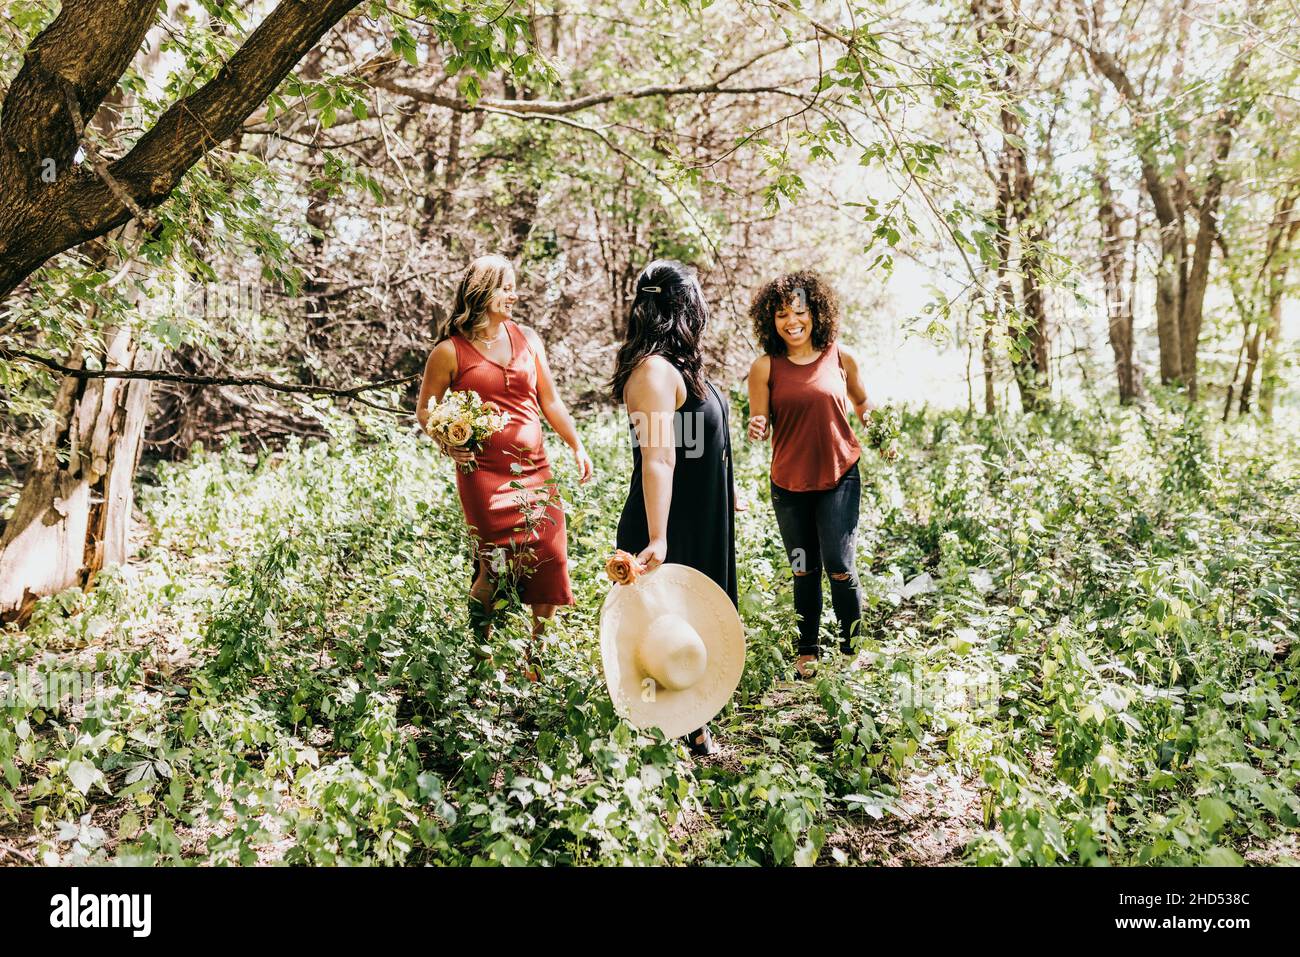 Group of women walking through wooded area during summer Stock Photo